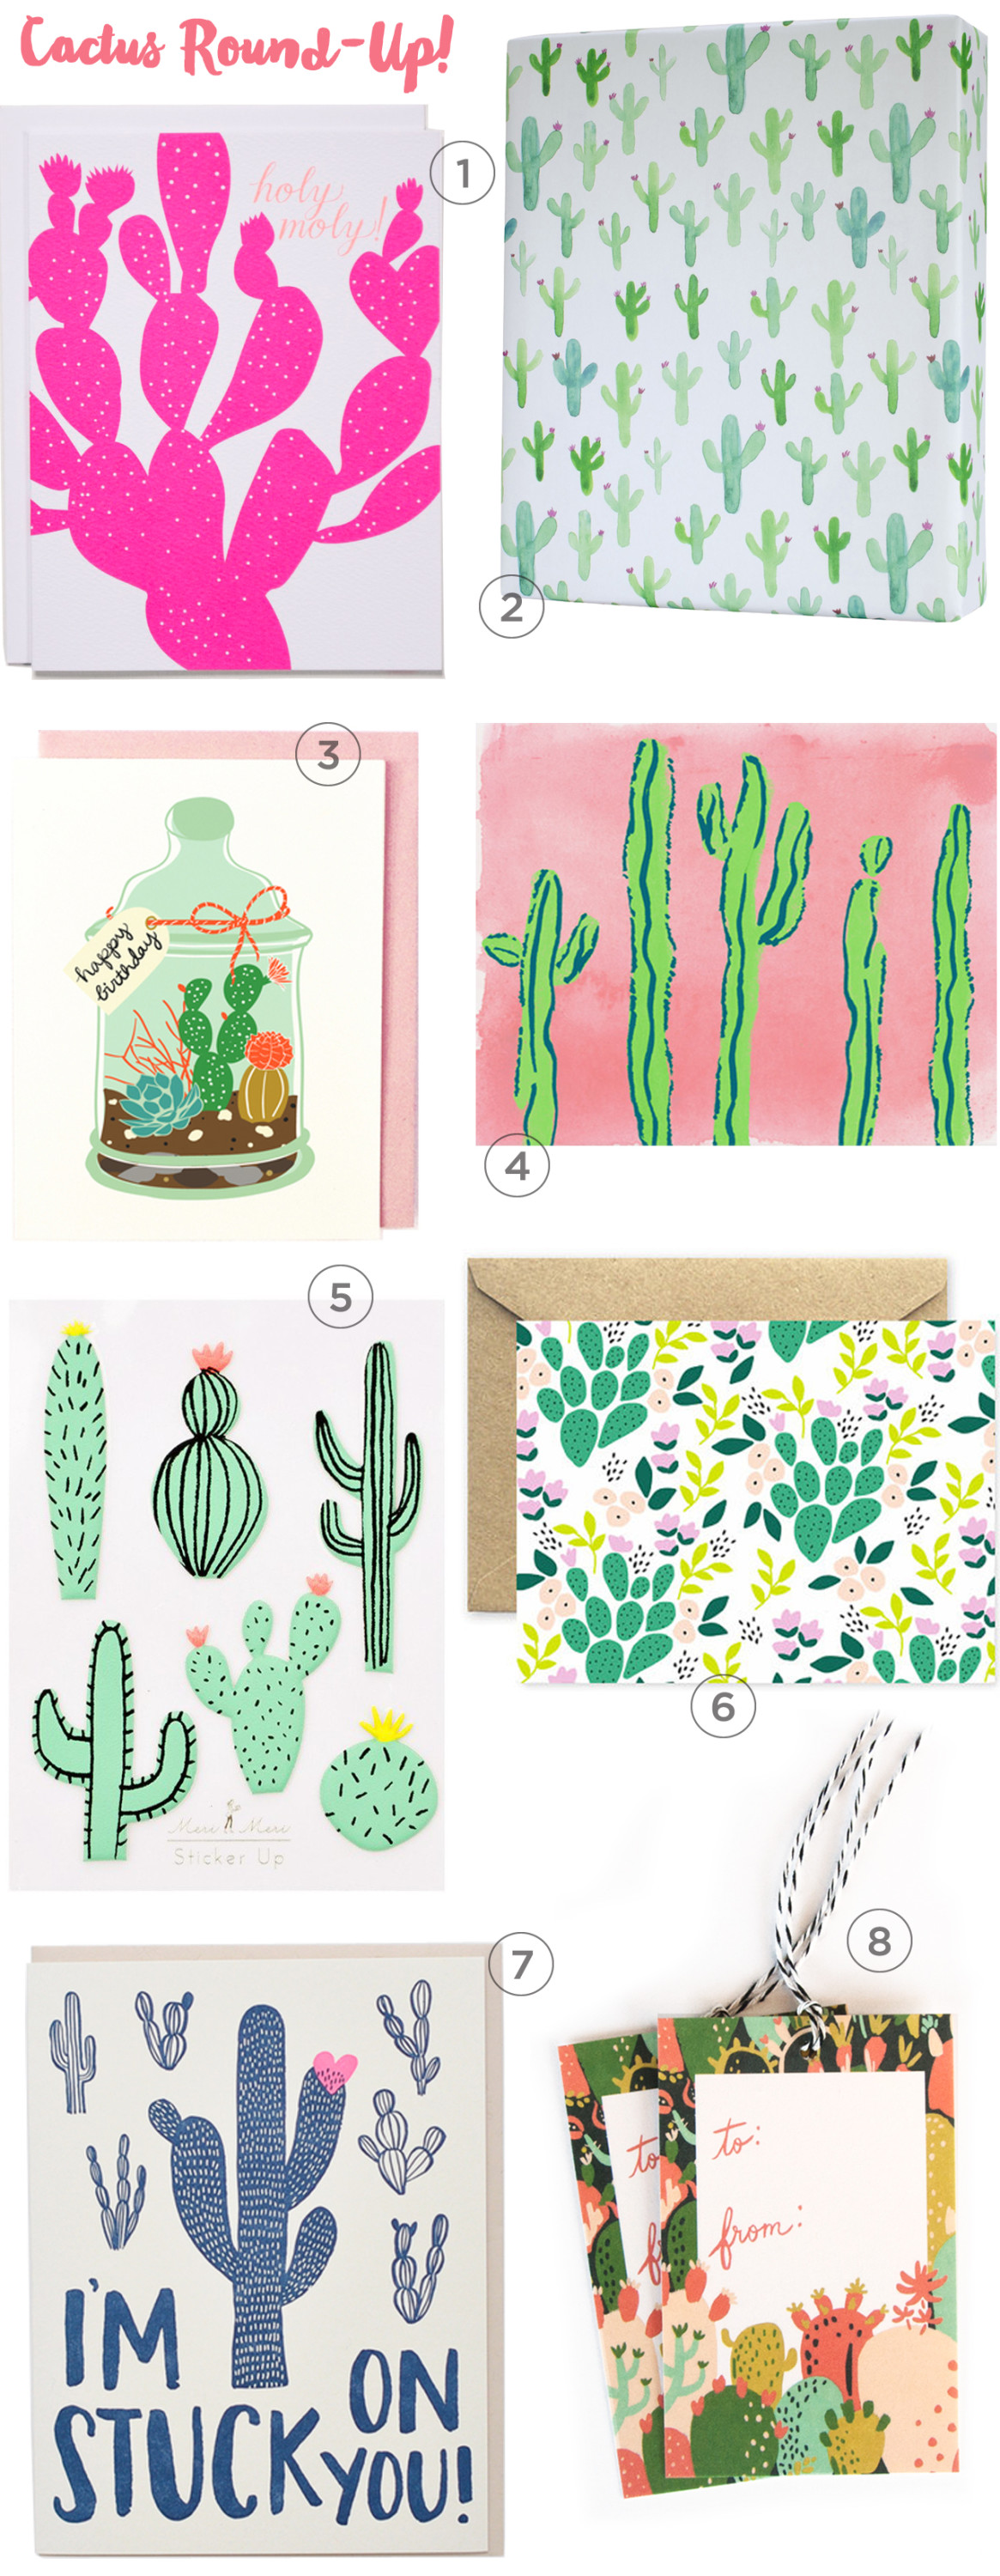 Cactus-Themed Paper Goods Round Up / Oh So Beautiful Paper